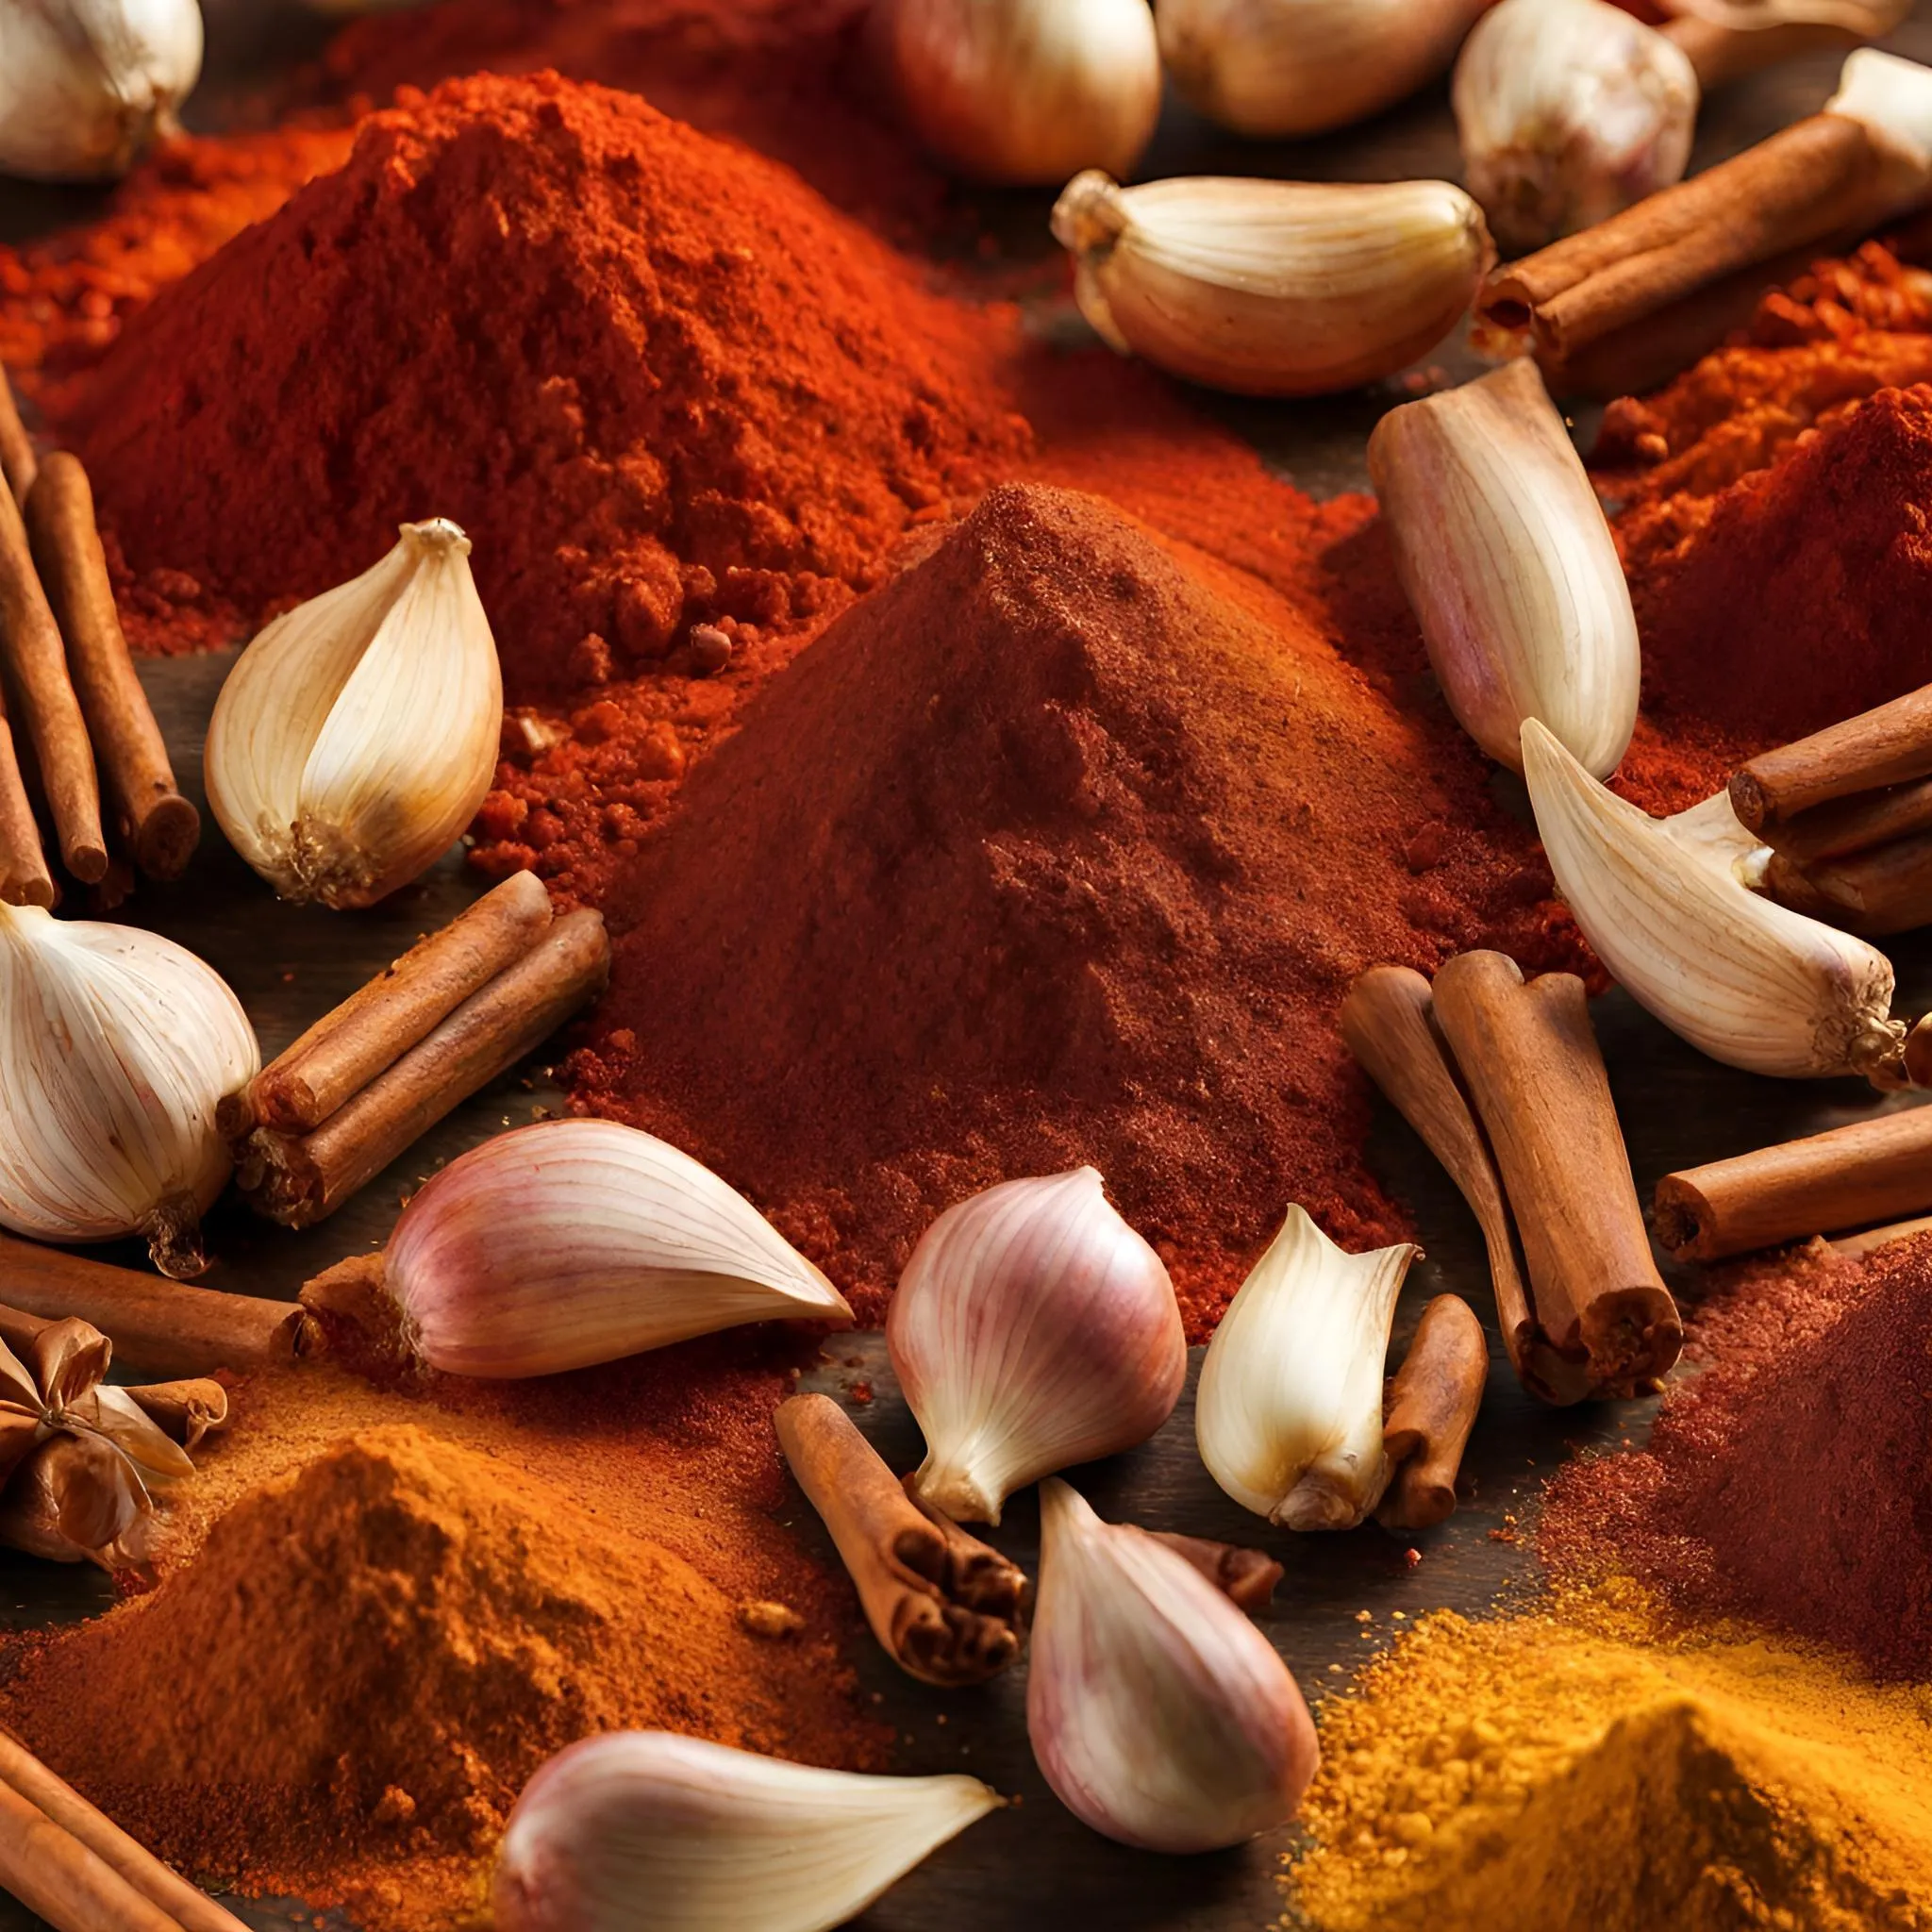 A variety of spices and vegetables on a table, including chili powder, garlic, paprika, and cinnamon, which are key ingredients in Cajun seasoning.